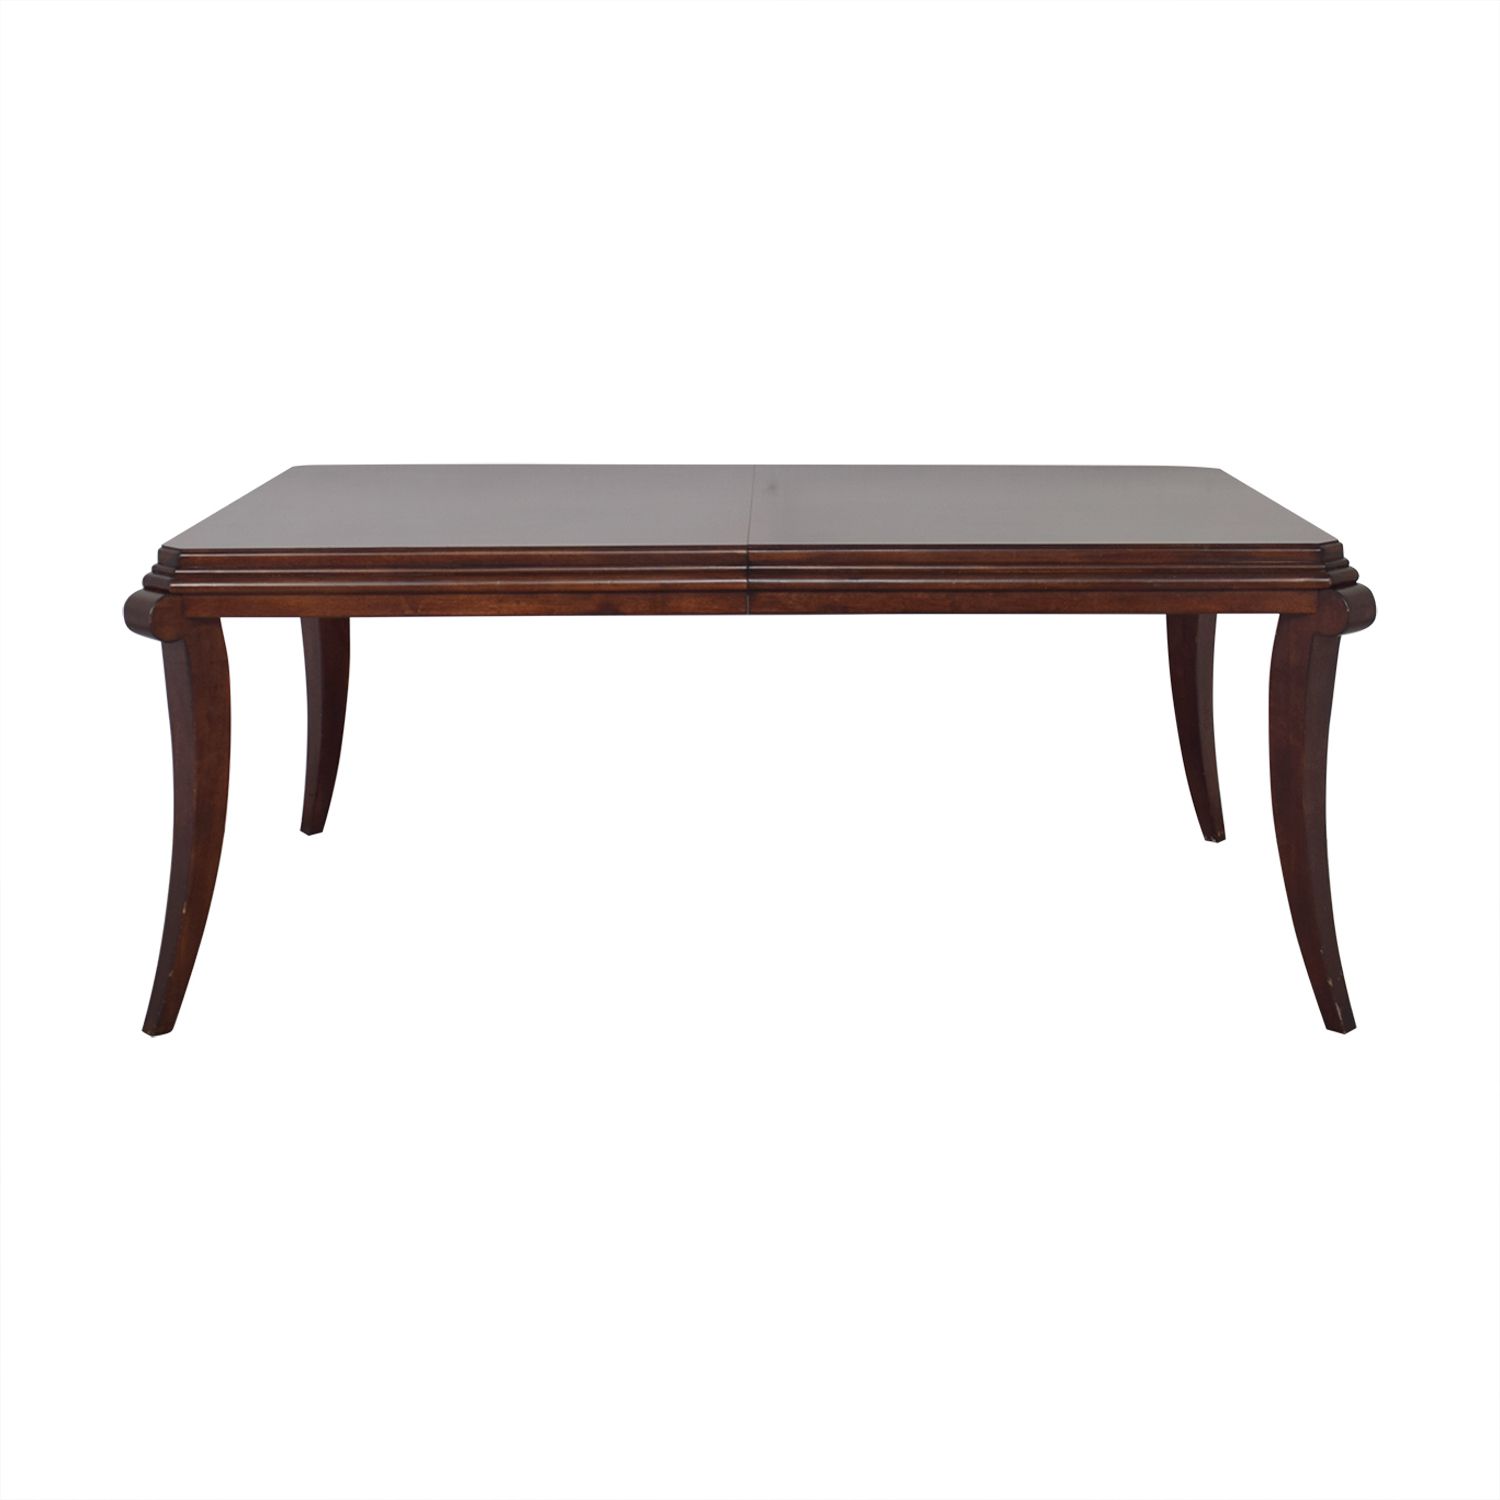 [%76% Off – Extension Dining Table / Tables Throughout Favorite Extension Dining Tables|extension Dining Tables In Current 76% Off – Extension Dining Table / Tables|latest Extension Dining Tables For 76% Off – Extension Dining Table / Tables|well Known 76% Off – Extension Dining Table / Tables Intended For Extension Dining Tables%] (View 9 of 25)